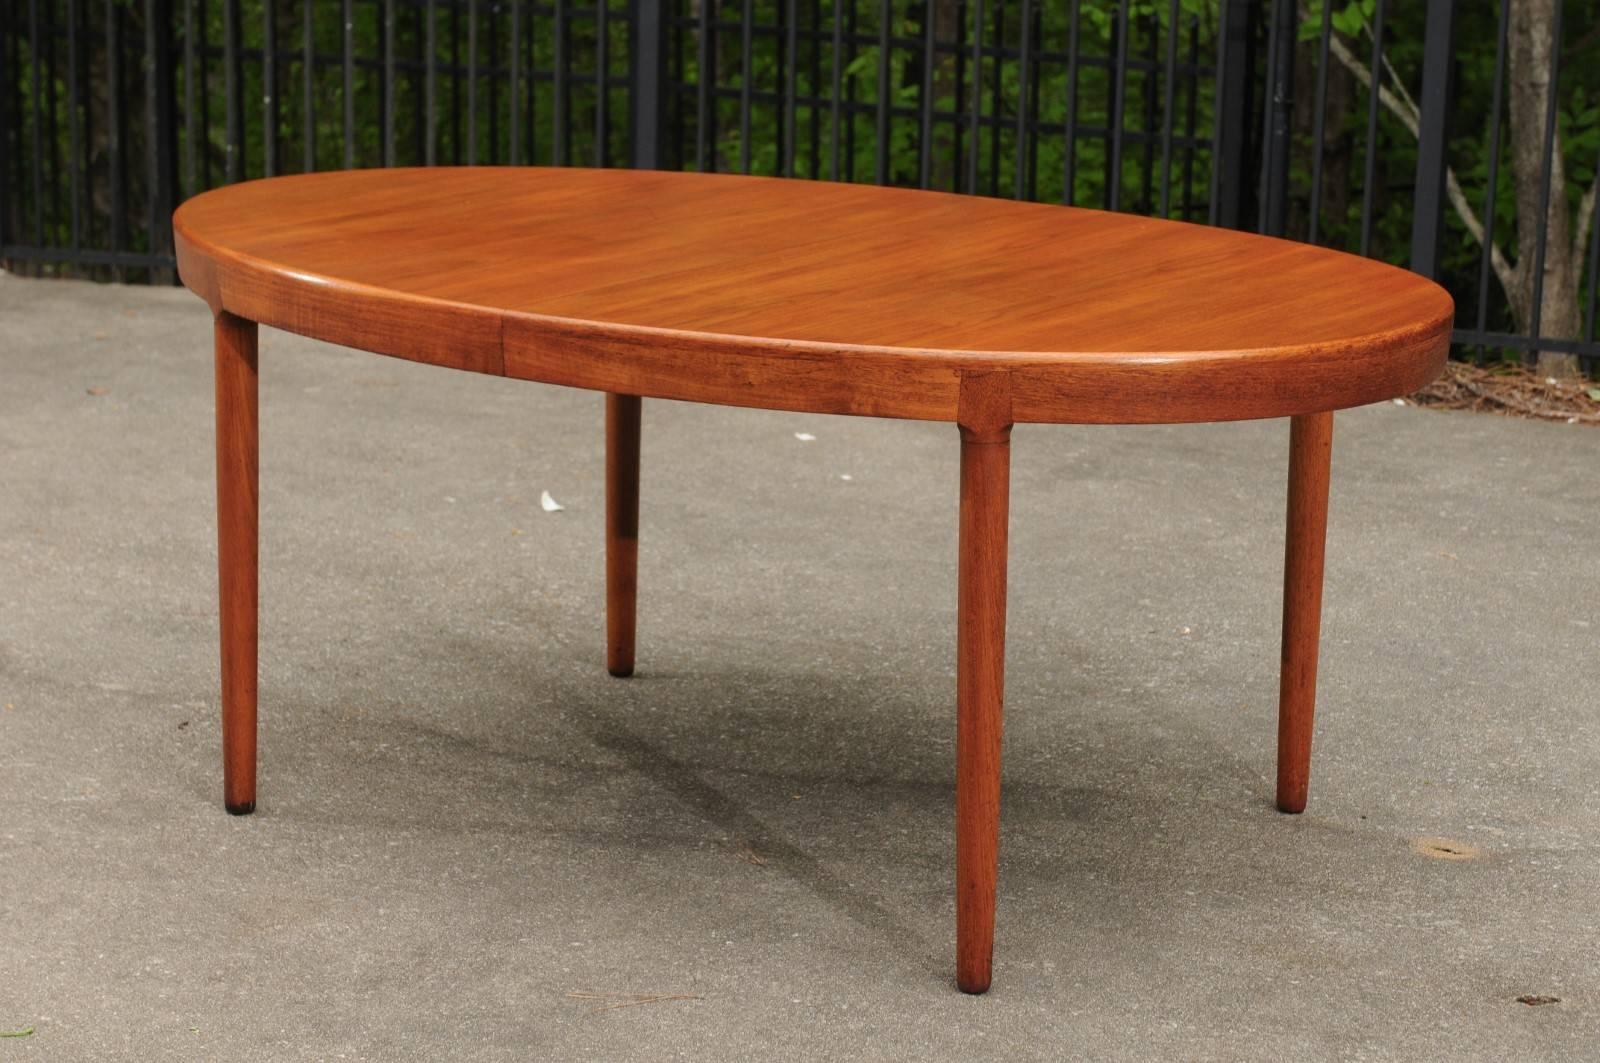 A stunning extension dining table by Harry Ostergaard for Randers Mobelfabrik, circa 1963. Clean and elegant design exquisitely executed in fabulous teak. Craftsmanship that is beyond incredible. A majestic and functional focal piece that will